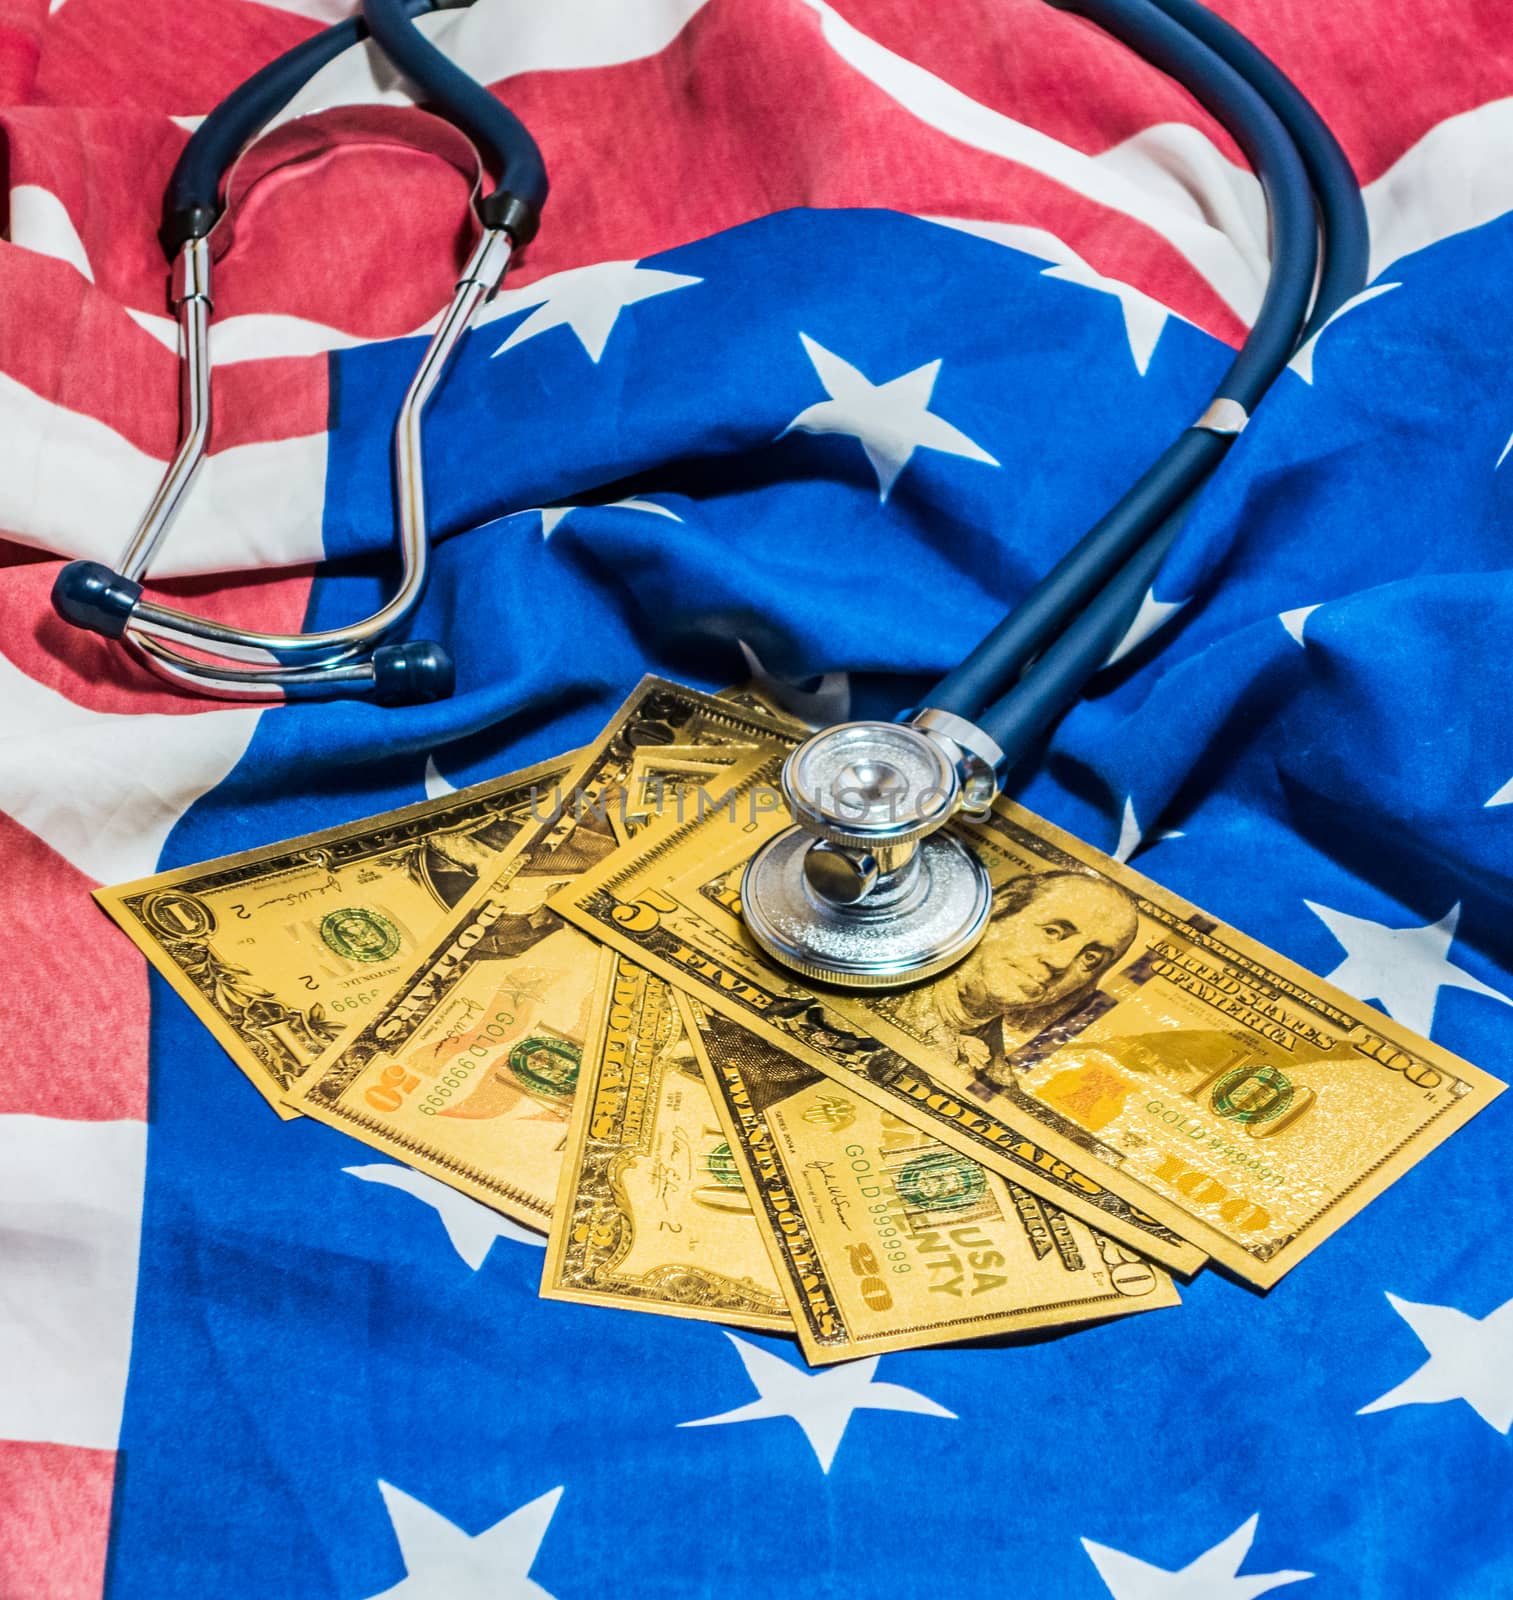 Sprague Rappaport Stethoscope US currency cash note bill design american dollars banknotes money gold fake background Finance business concept. American flag background